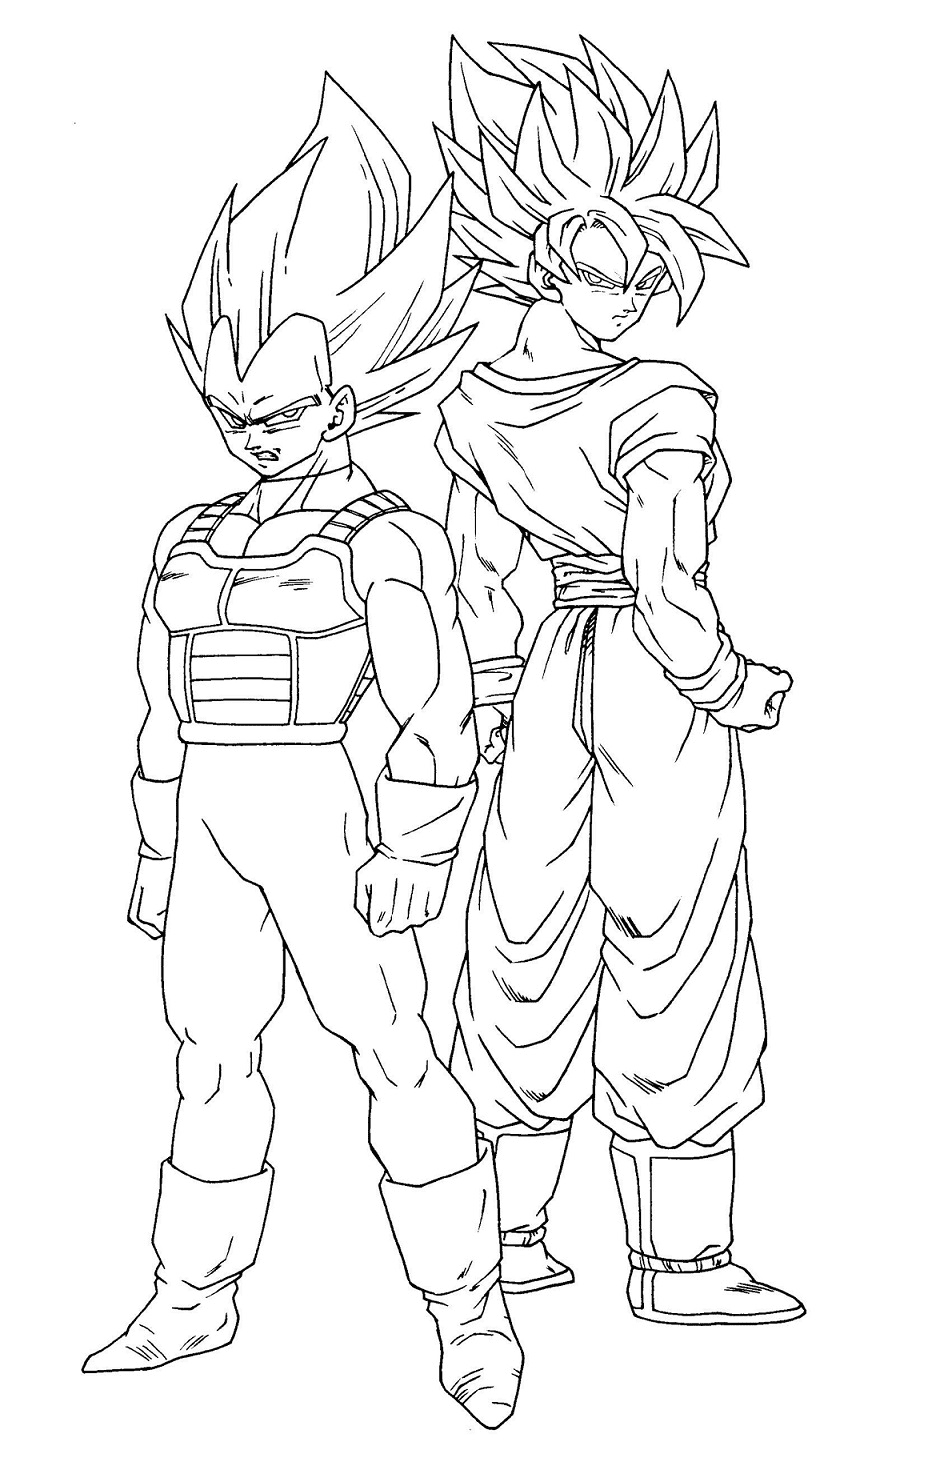 Awesome Goku And Vegeta Coloring Pages - Dragon Ball Z Coloring Pages -  Coloring Pages For Kids And Adults